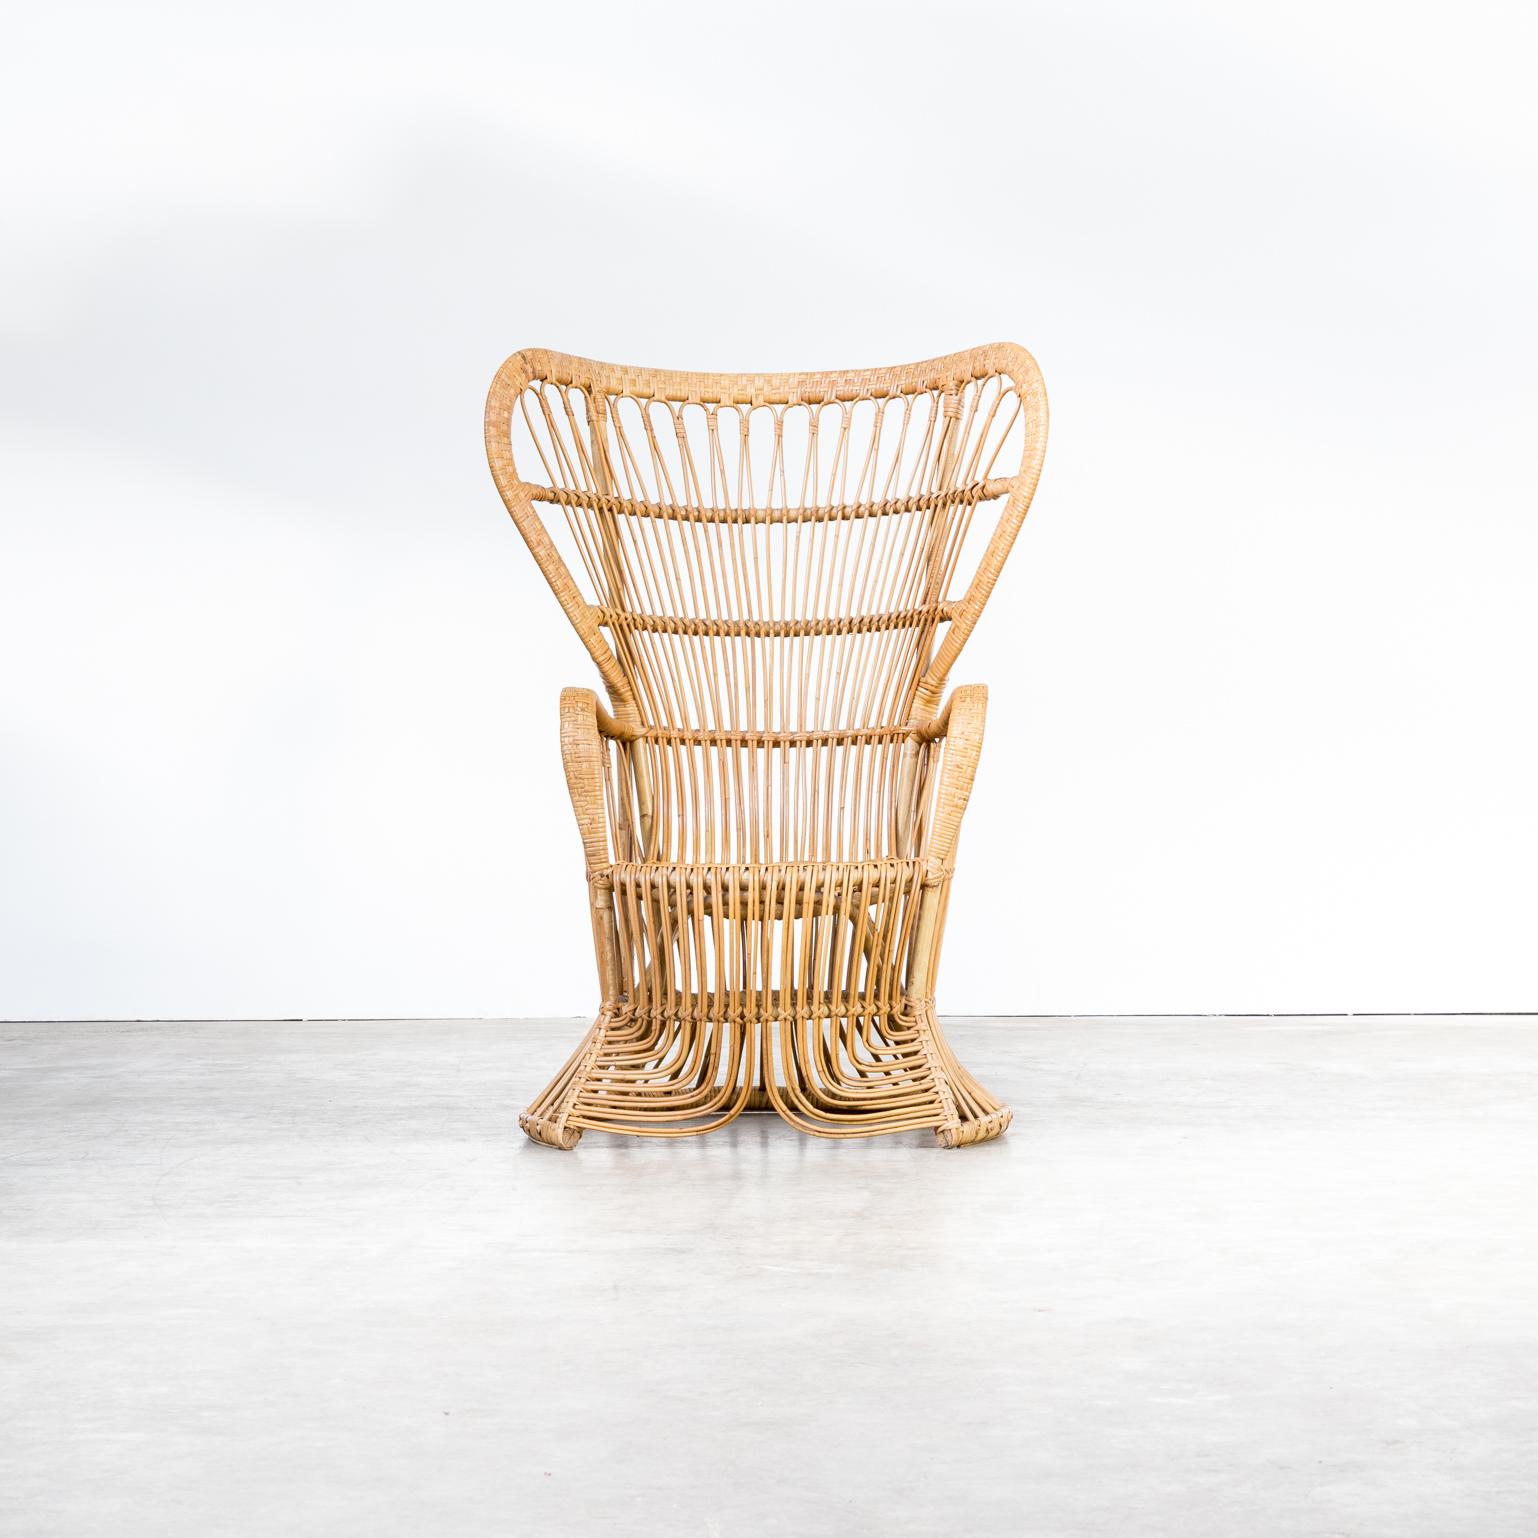 Midcentury peacock chair rattan for Rohé Noordwolde. The throne in wicker chairs, inspired by Gio Ponti and Franco Albine this rattan chair has been launched in the 1950s by the Dutch Rohé manufactury. Nice design is the 'opening curtain' look of